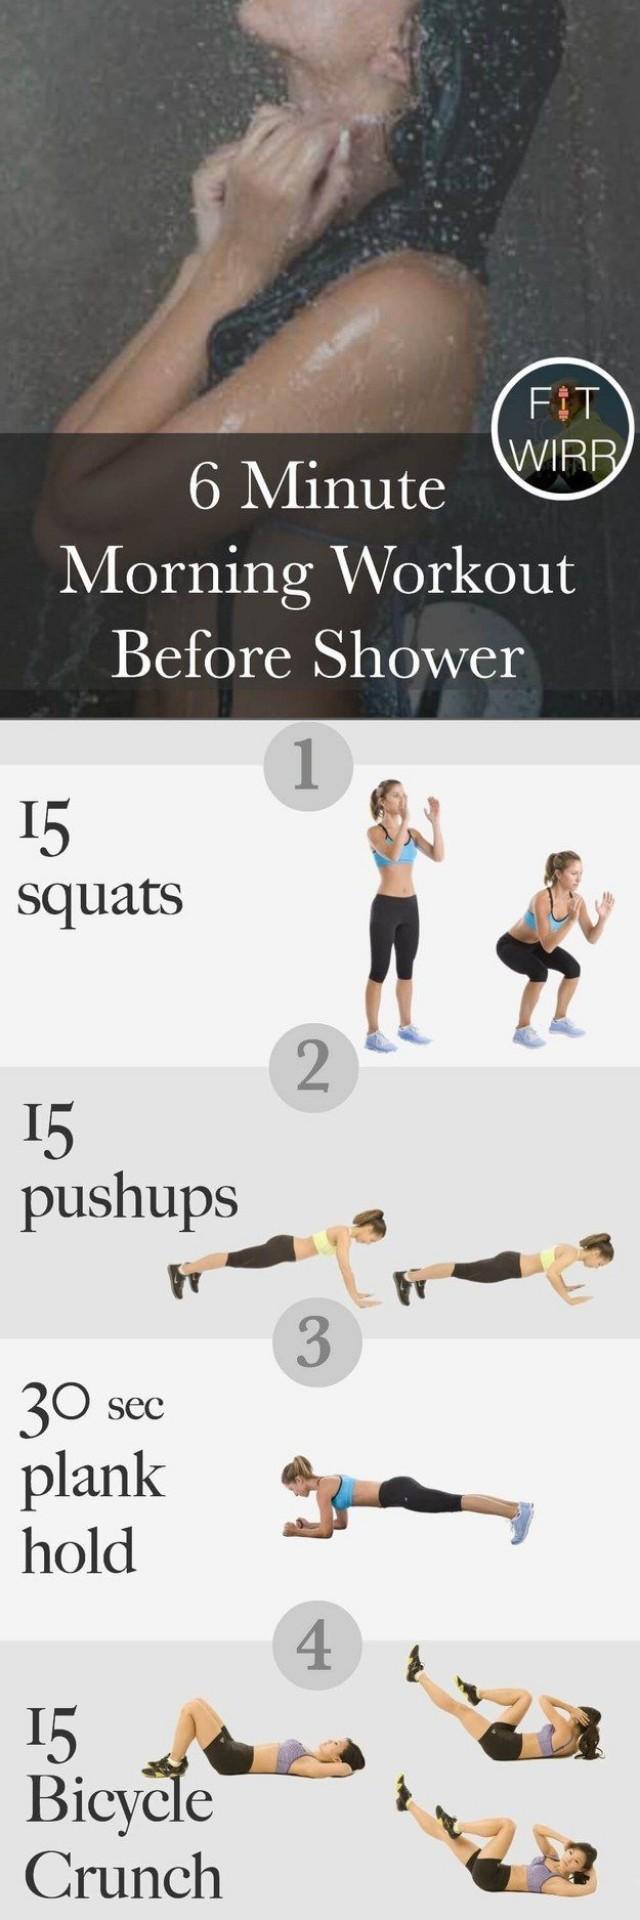 18 Quick Workouts That'll Help You Exercise Pretty Much Anywhere